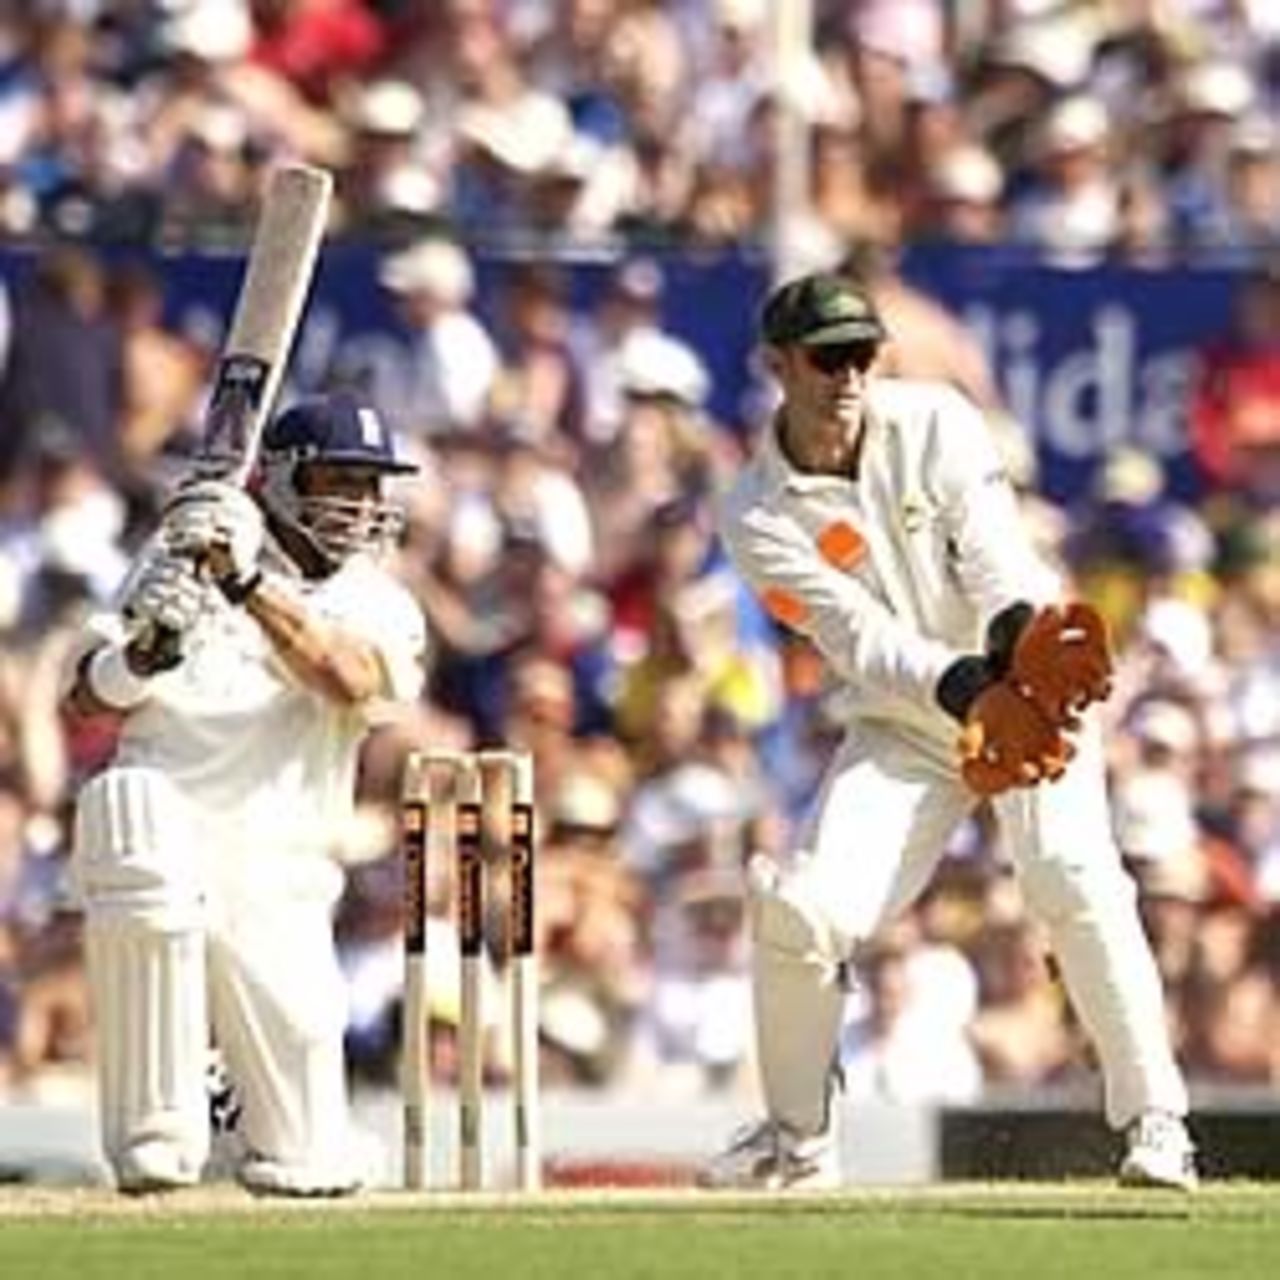 SYDNEY - JANUARY 2: Mark Butcher of England hits out during the first day of the fifth Ashes Test between Australia and England at the Sydney Cricket Ground in Sydney, Australia on January 2, 2003.